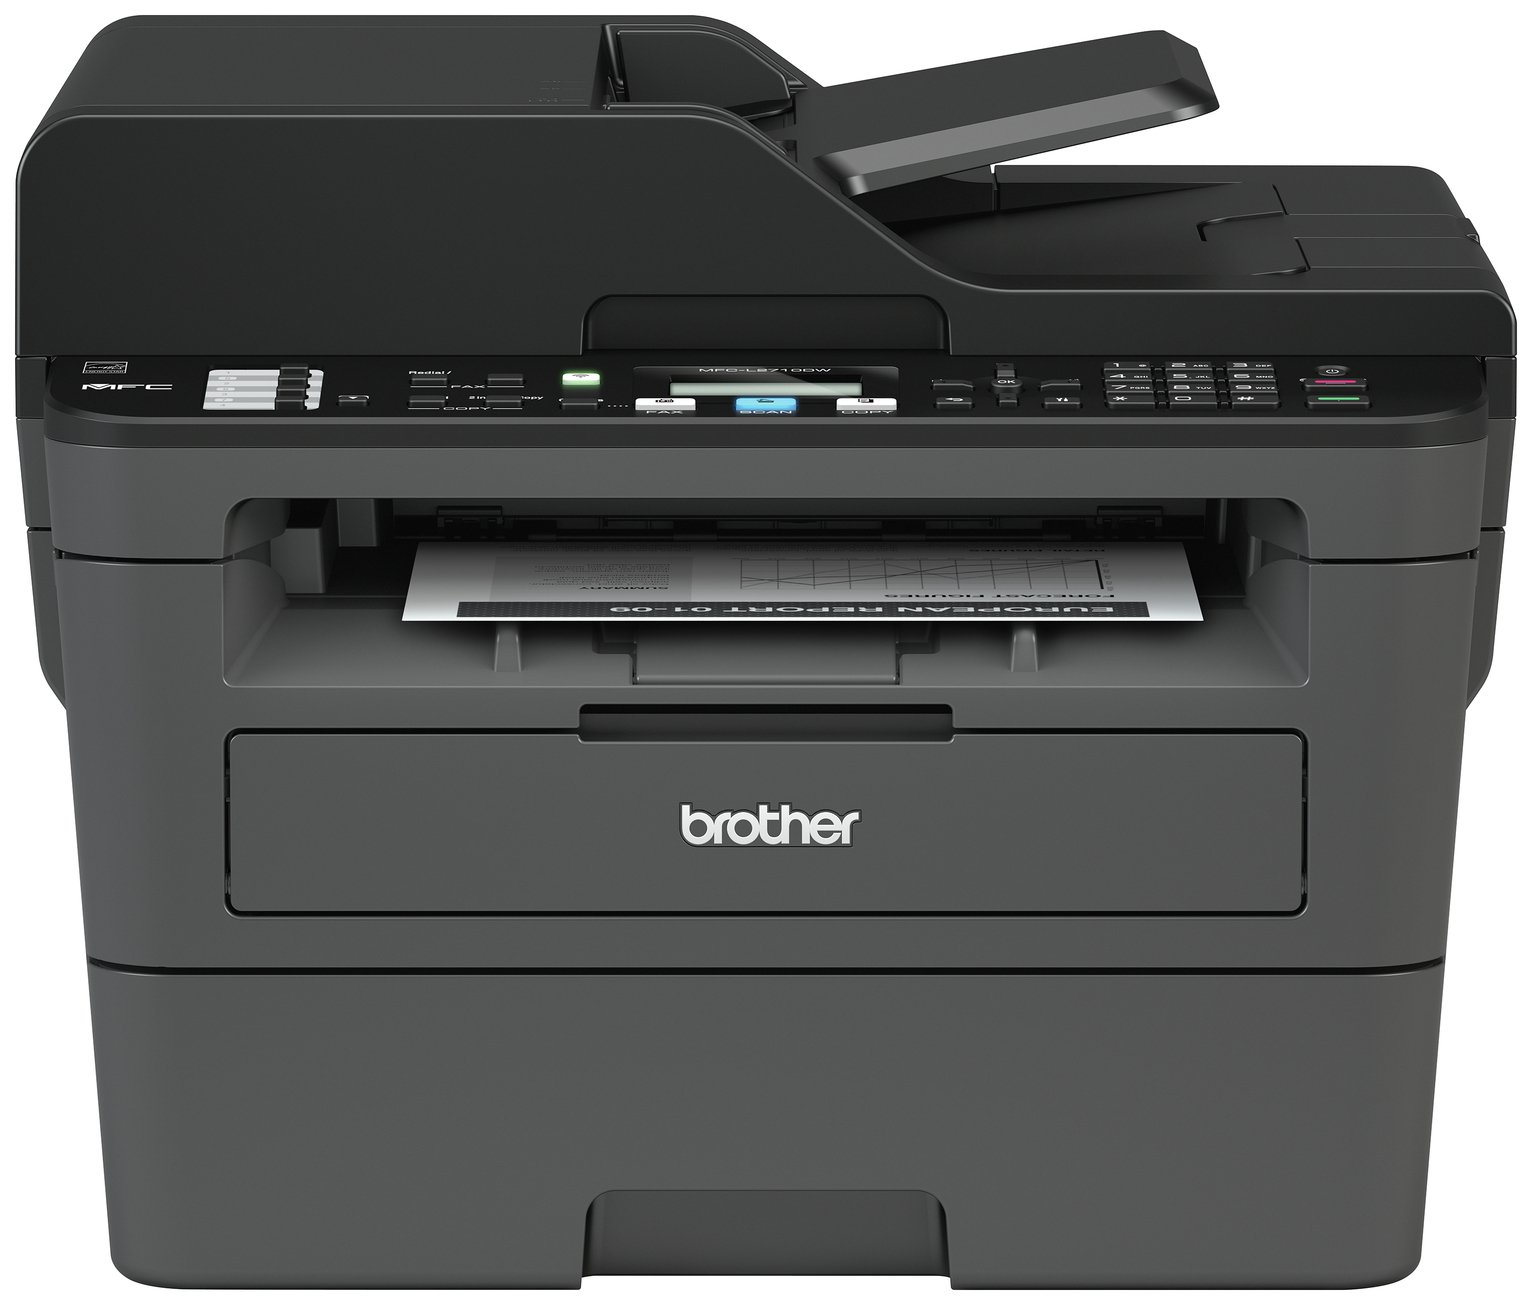 Brother MFC-L2710DW All-in-One Laser Printer review